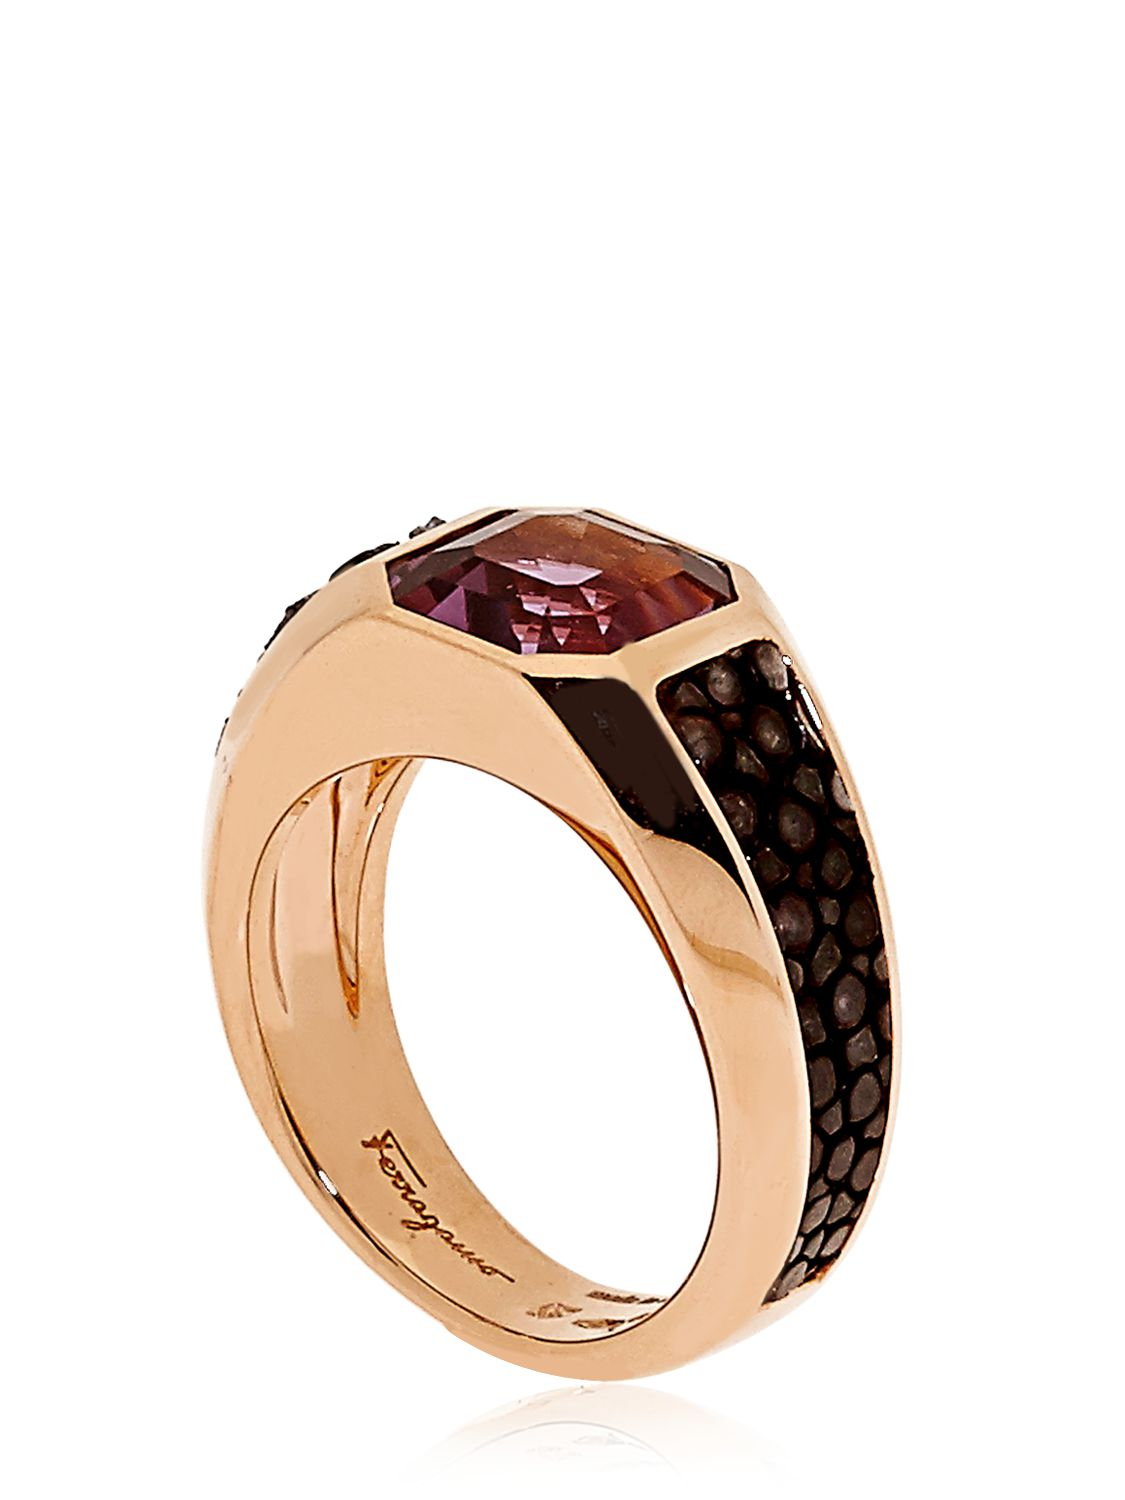 Lyst Ferragamo Galuchat Fine Jewellery Collection Ring in Pink